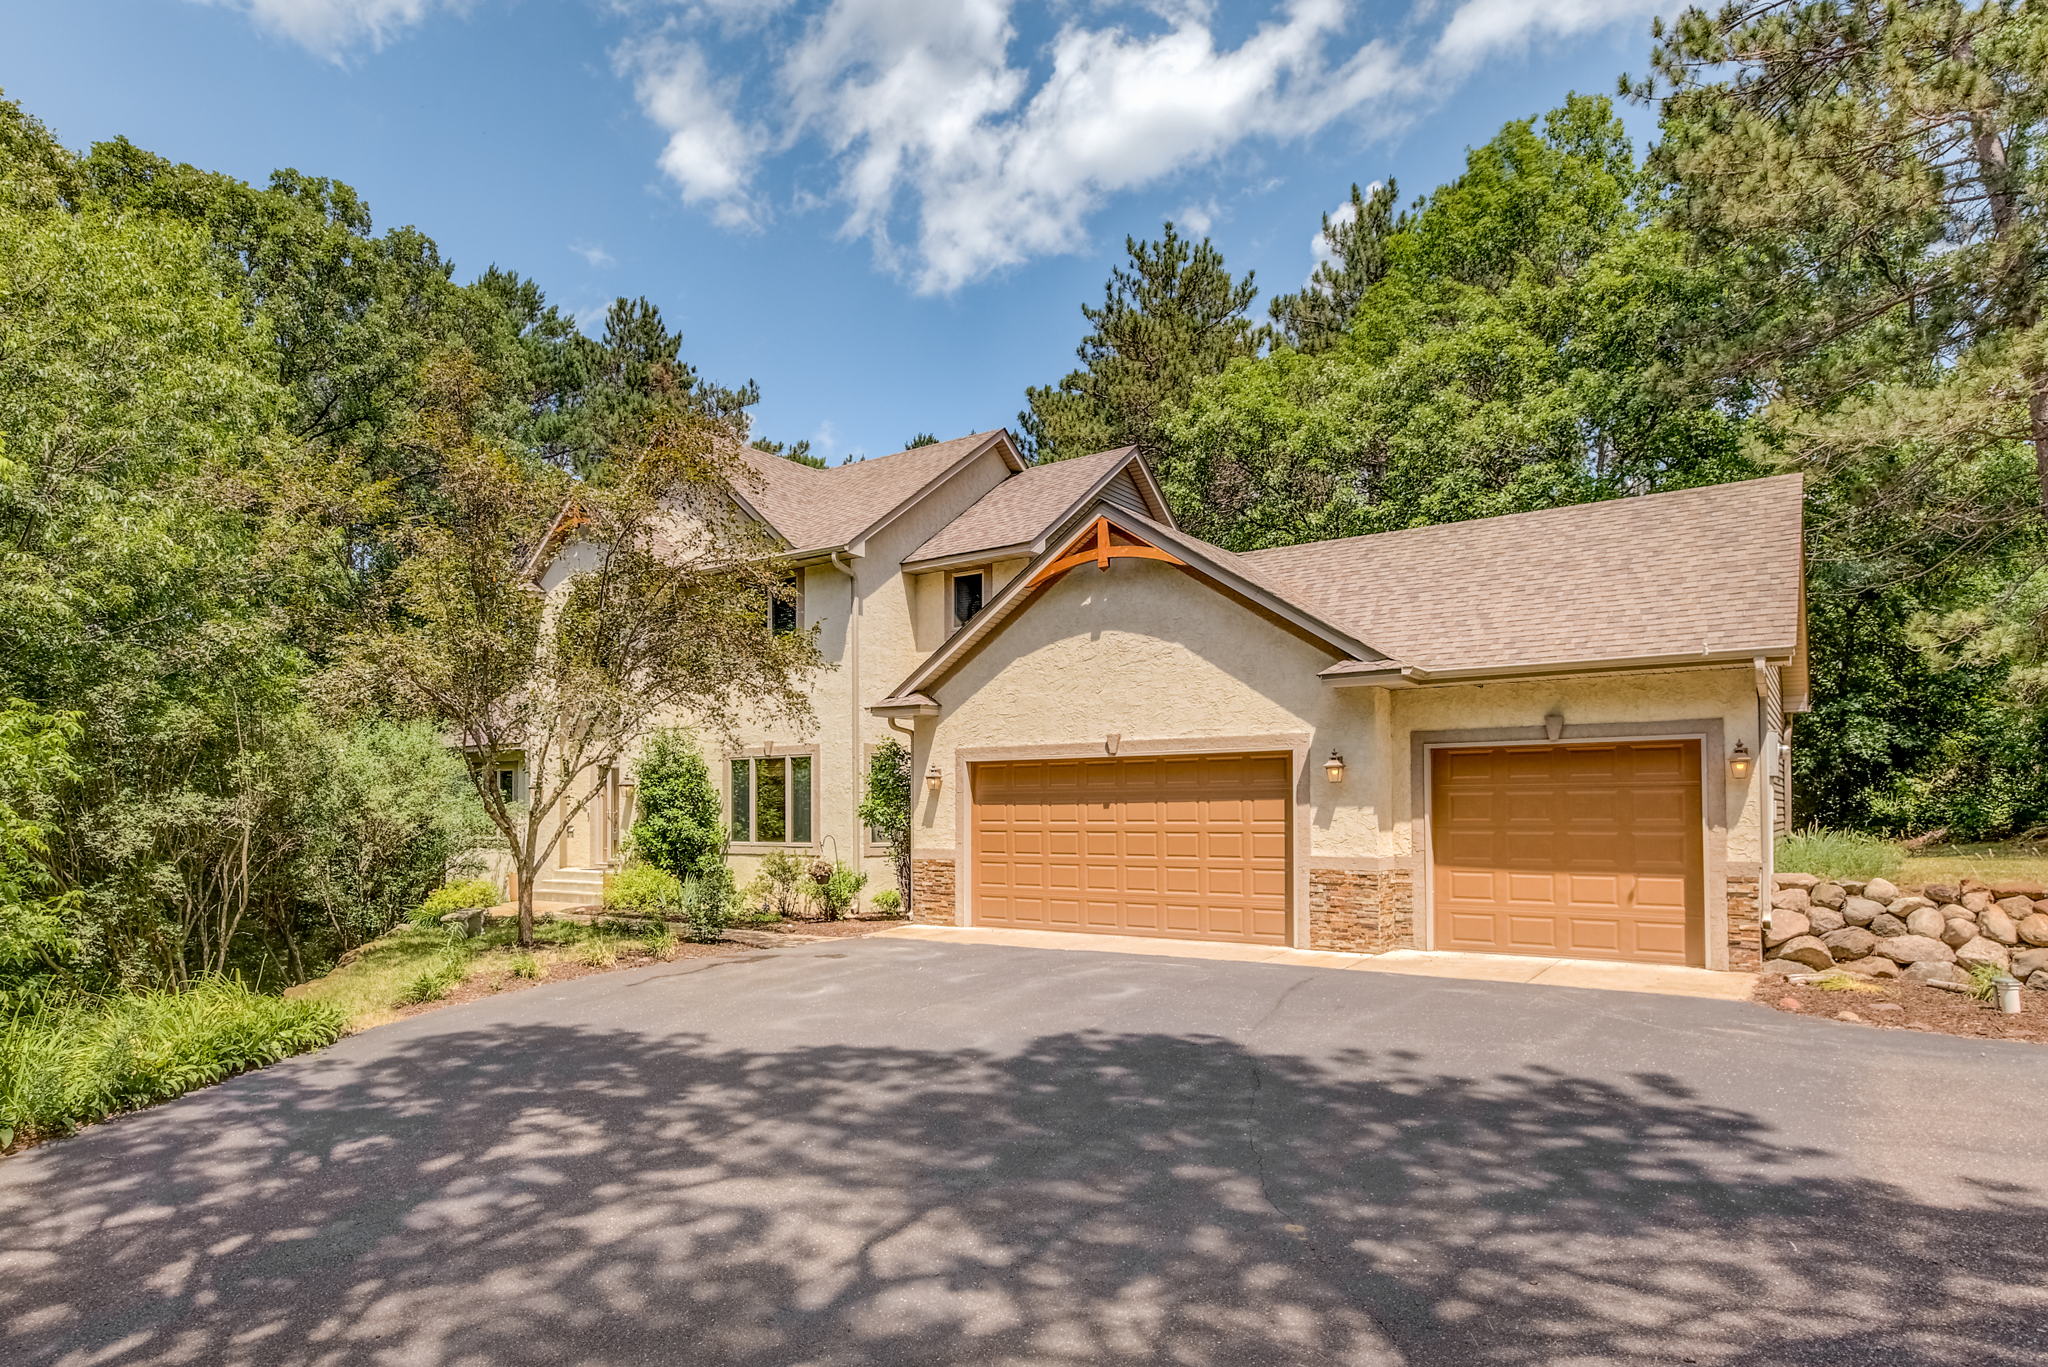 Gorgeous home in the Woodlands of Livonia